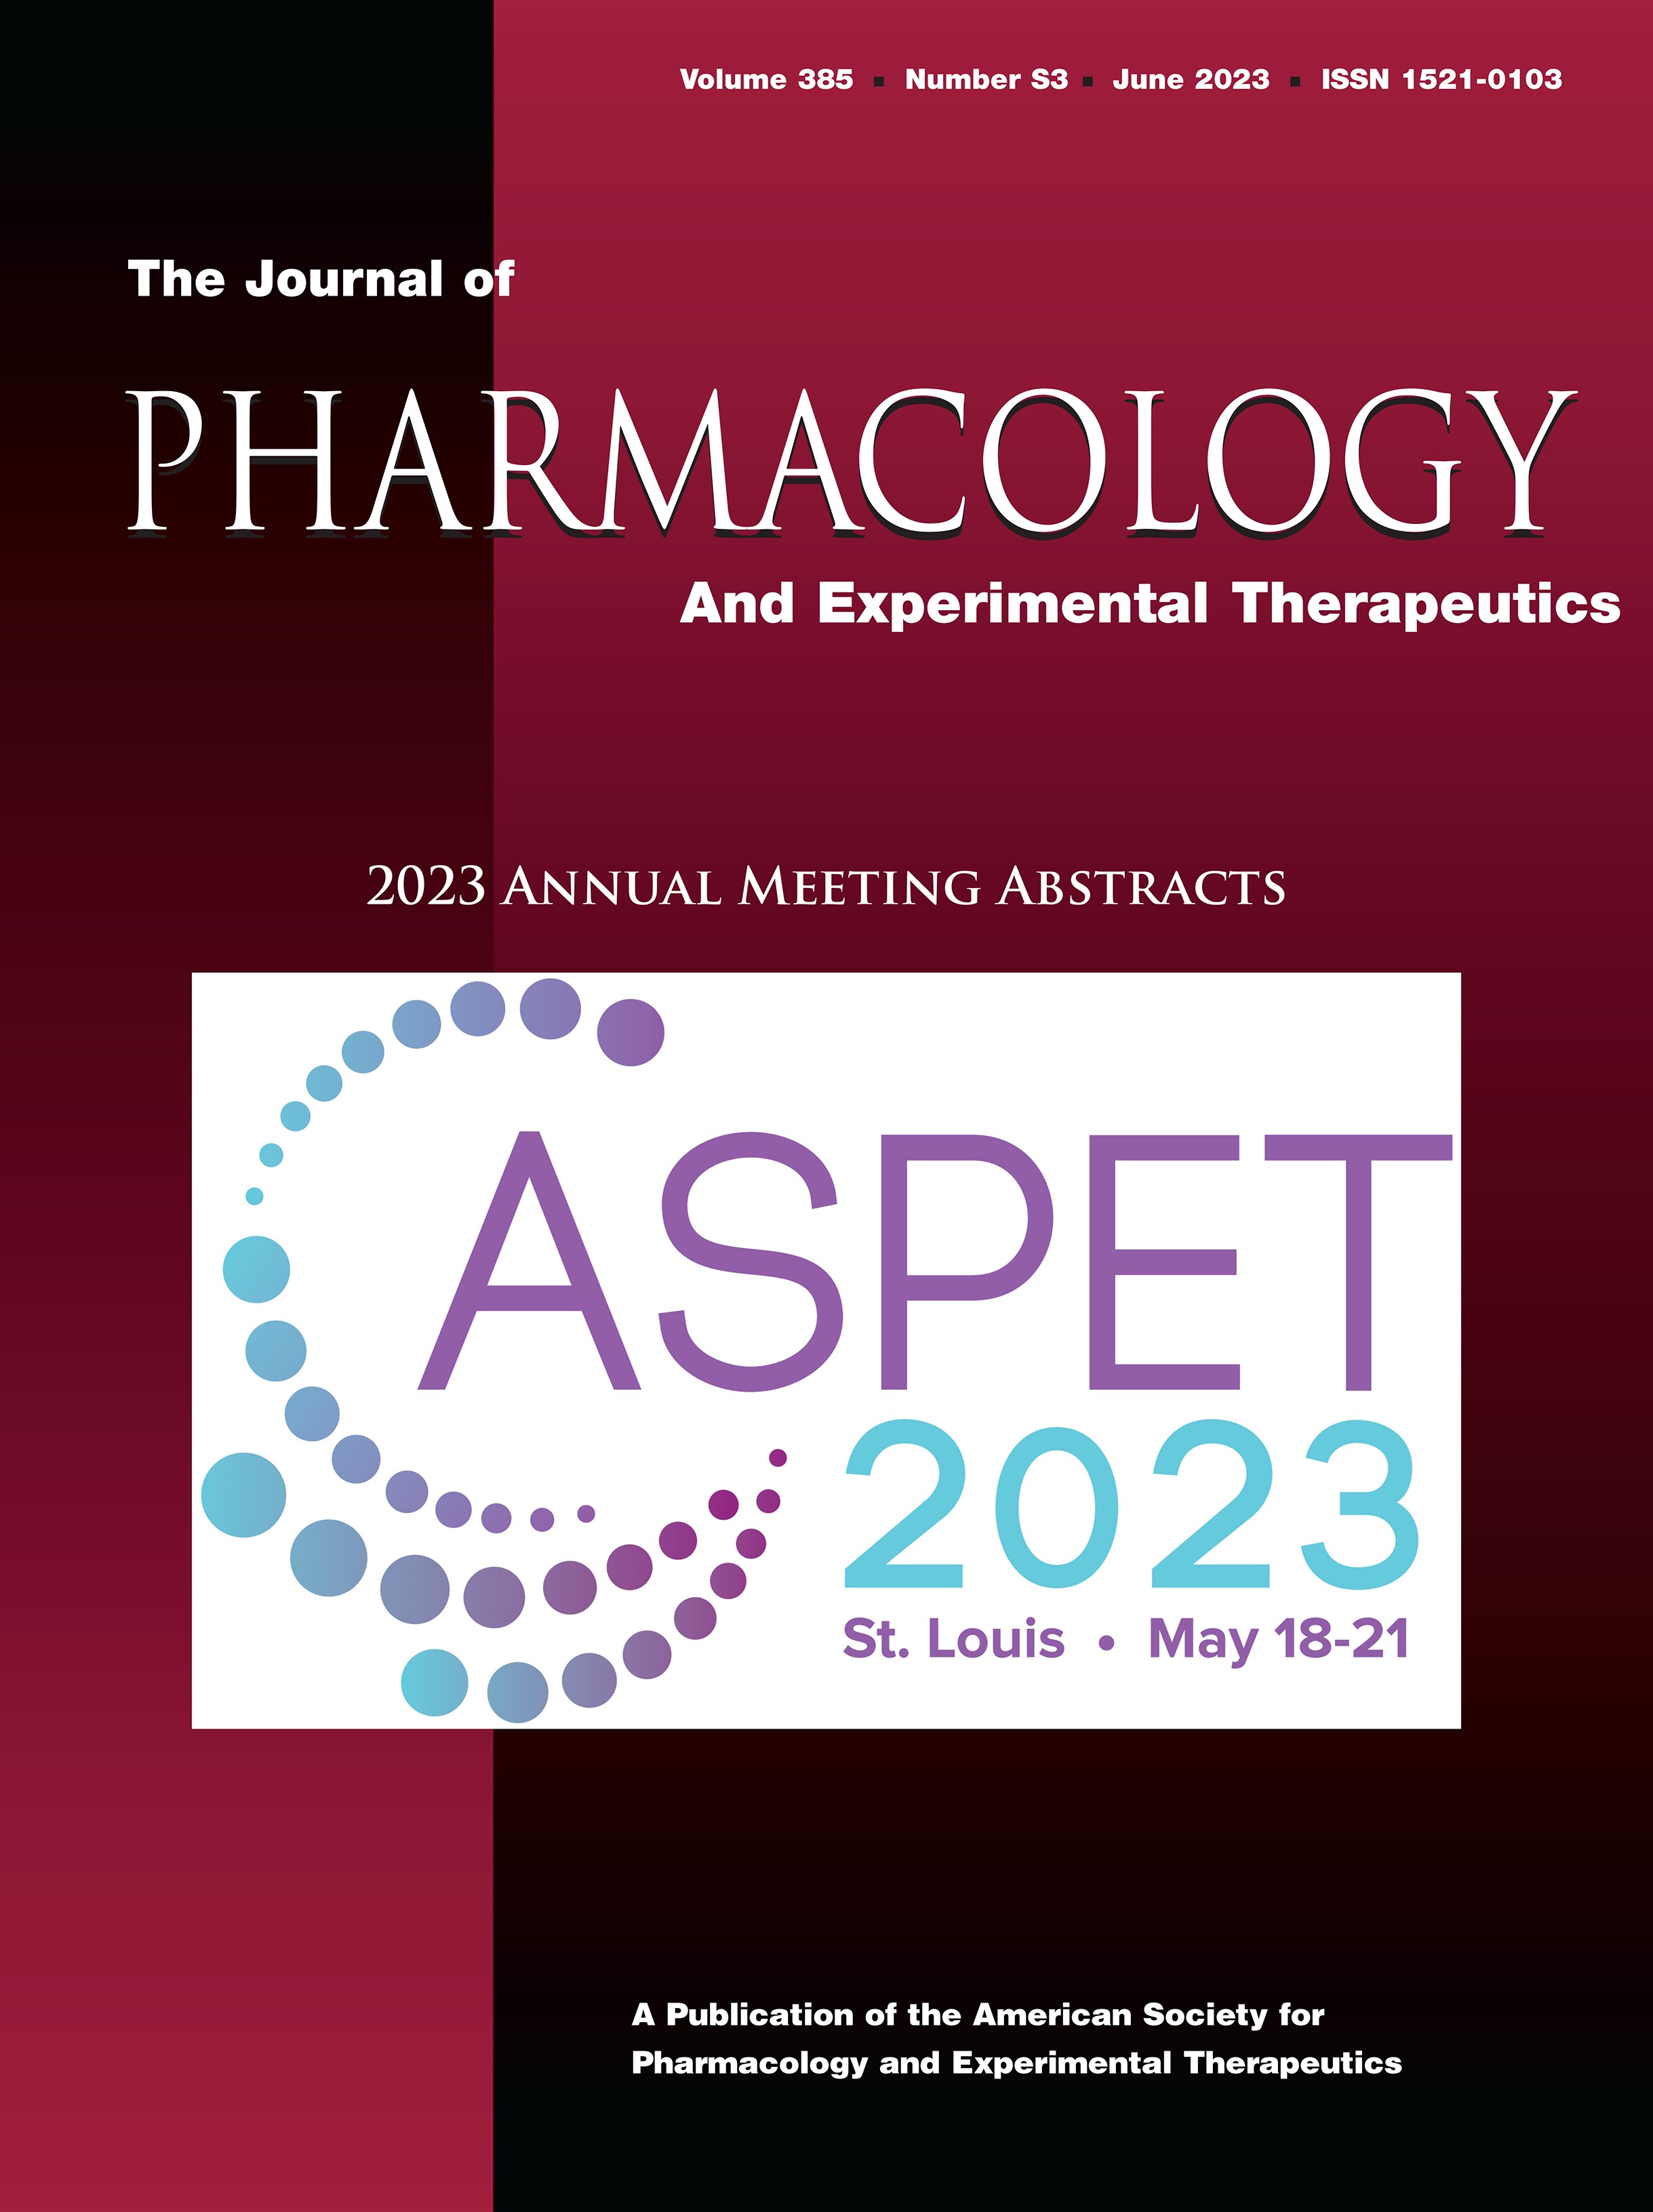 Student perceptions of scholarly scientific writing in pharmacology: student generation of collaborative rubrics to score literature reviews in social pharmacology [ASPET 2023 Annual Meeting Abstract - Pharmacology Education]